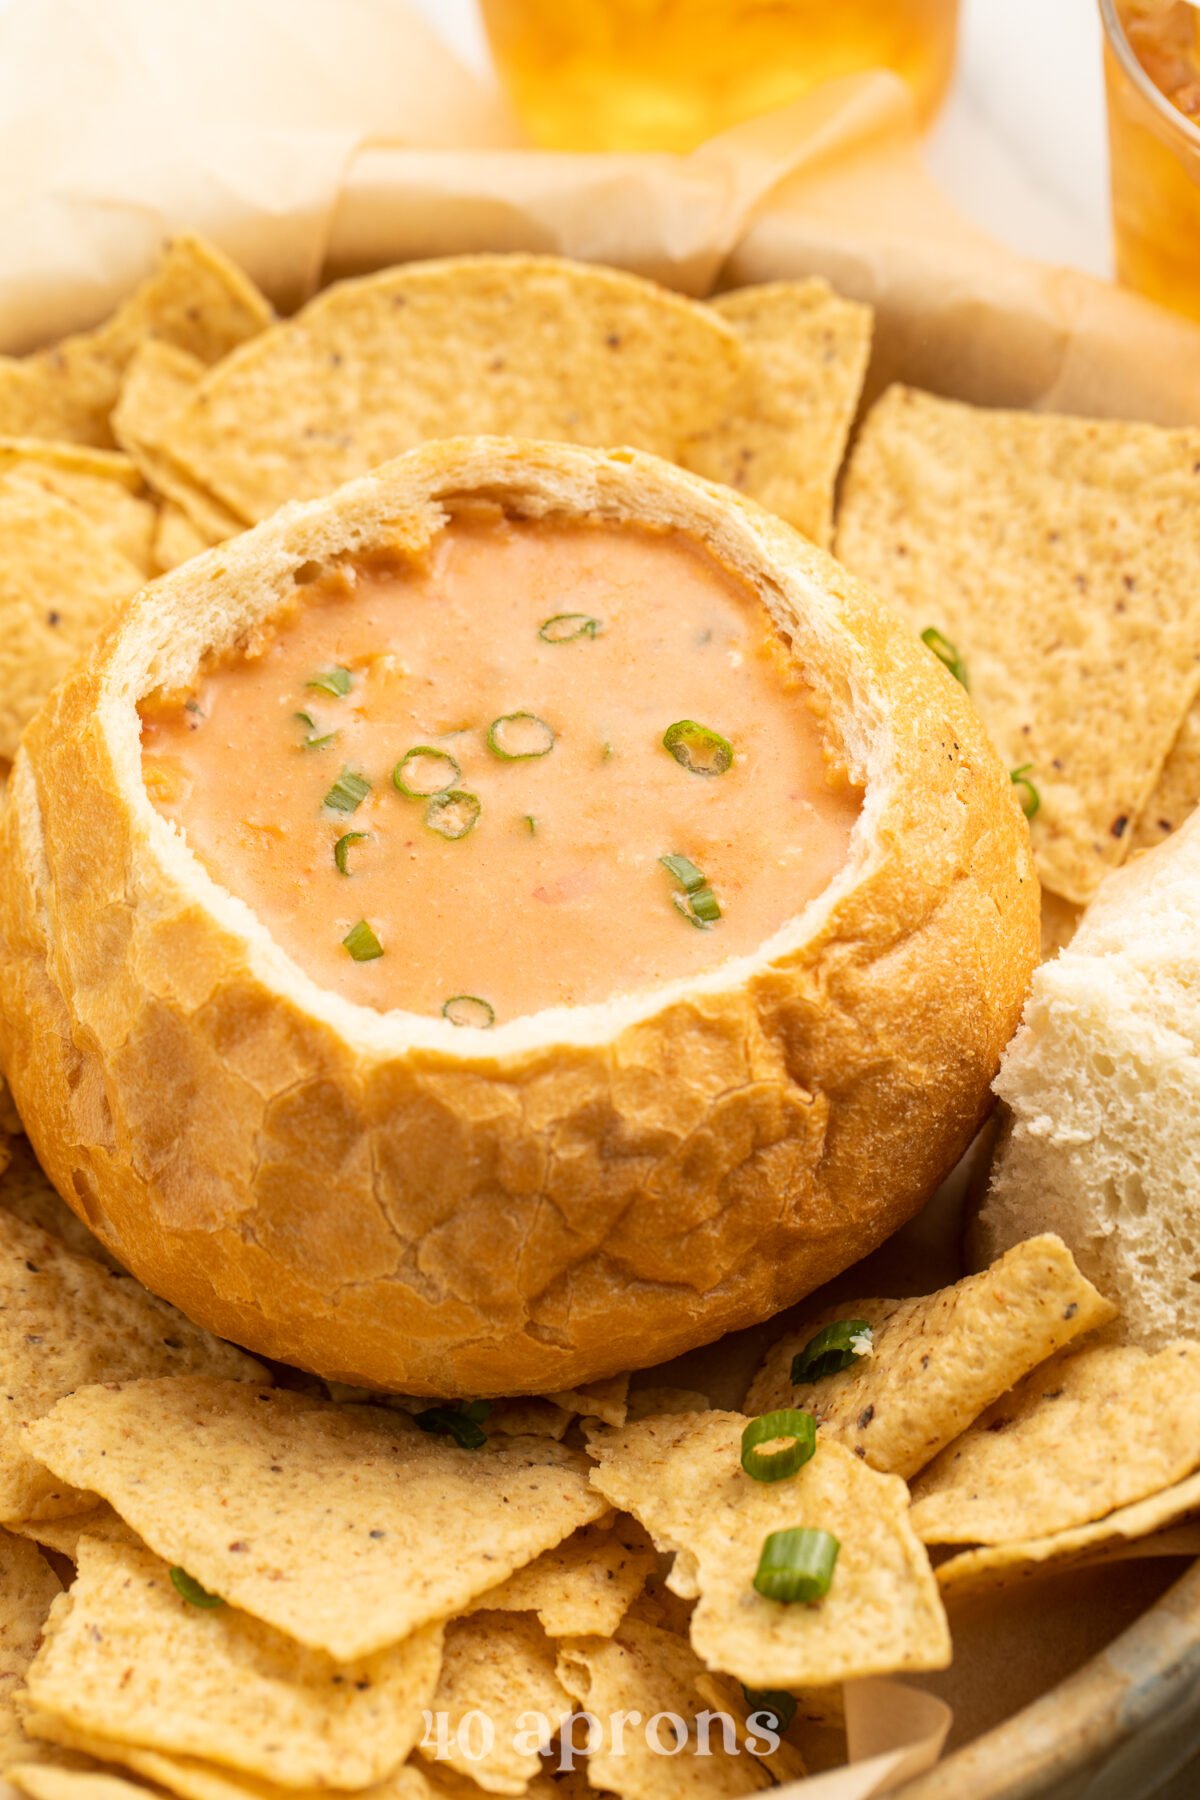 A bread bowl holding a copycat version of McAlister’s Chicken Tortilla Soup surrounded by tortilla chips.